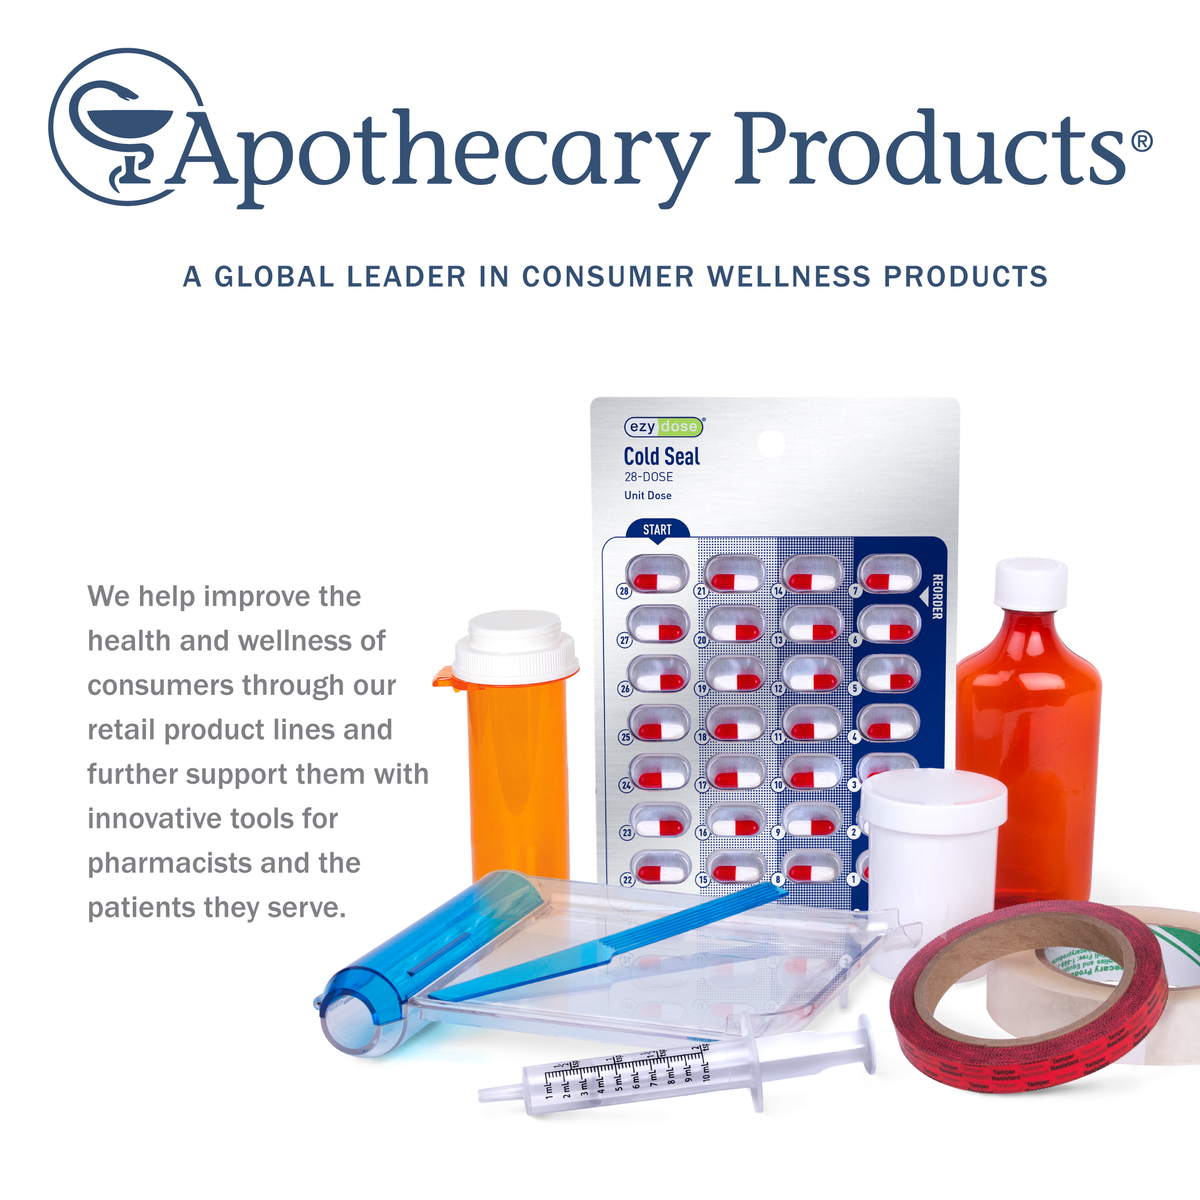 Apothecary Products is a global leader in consumer wellness products